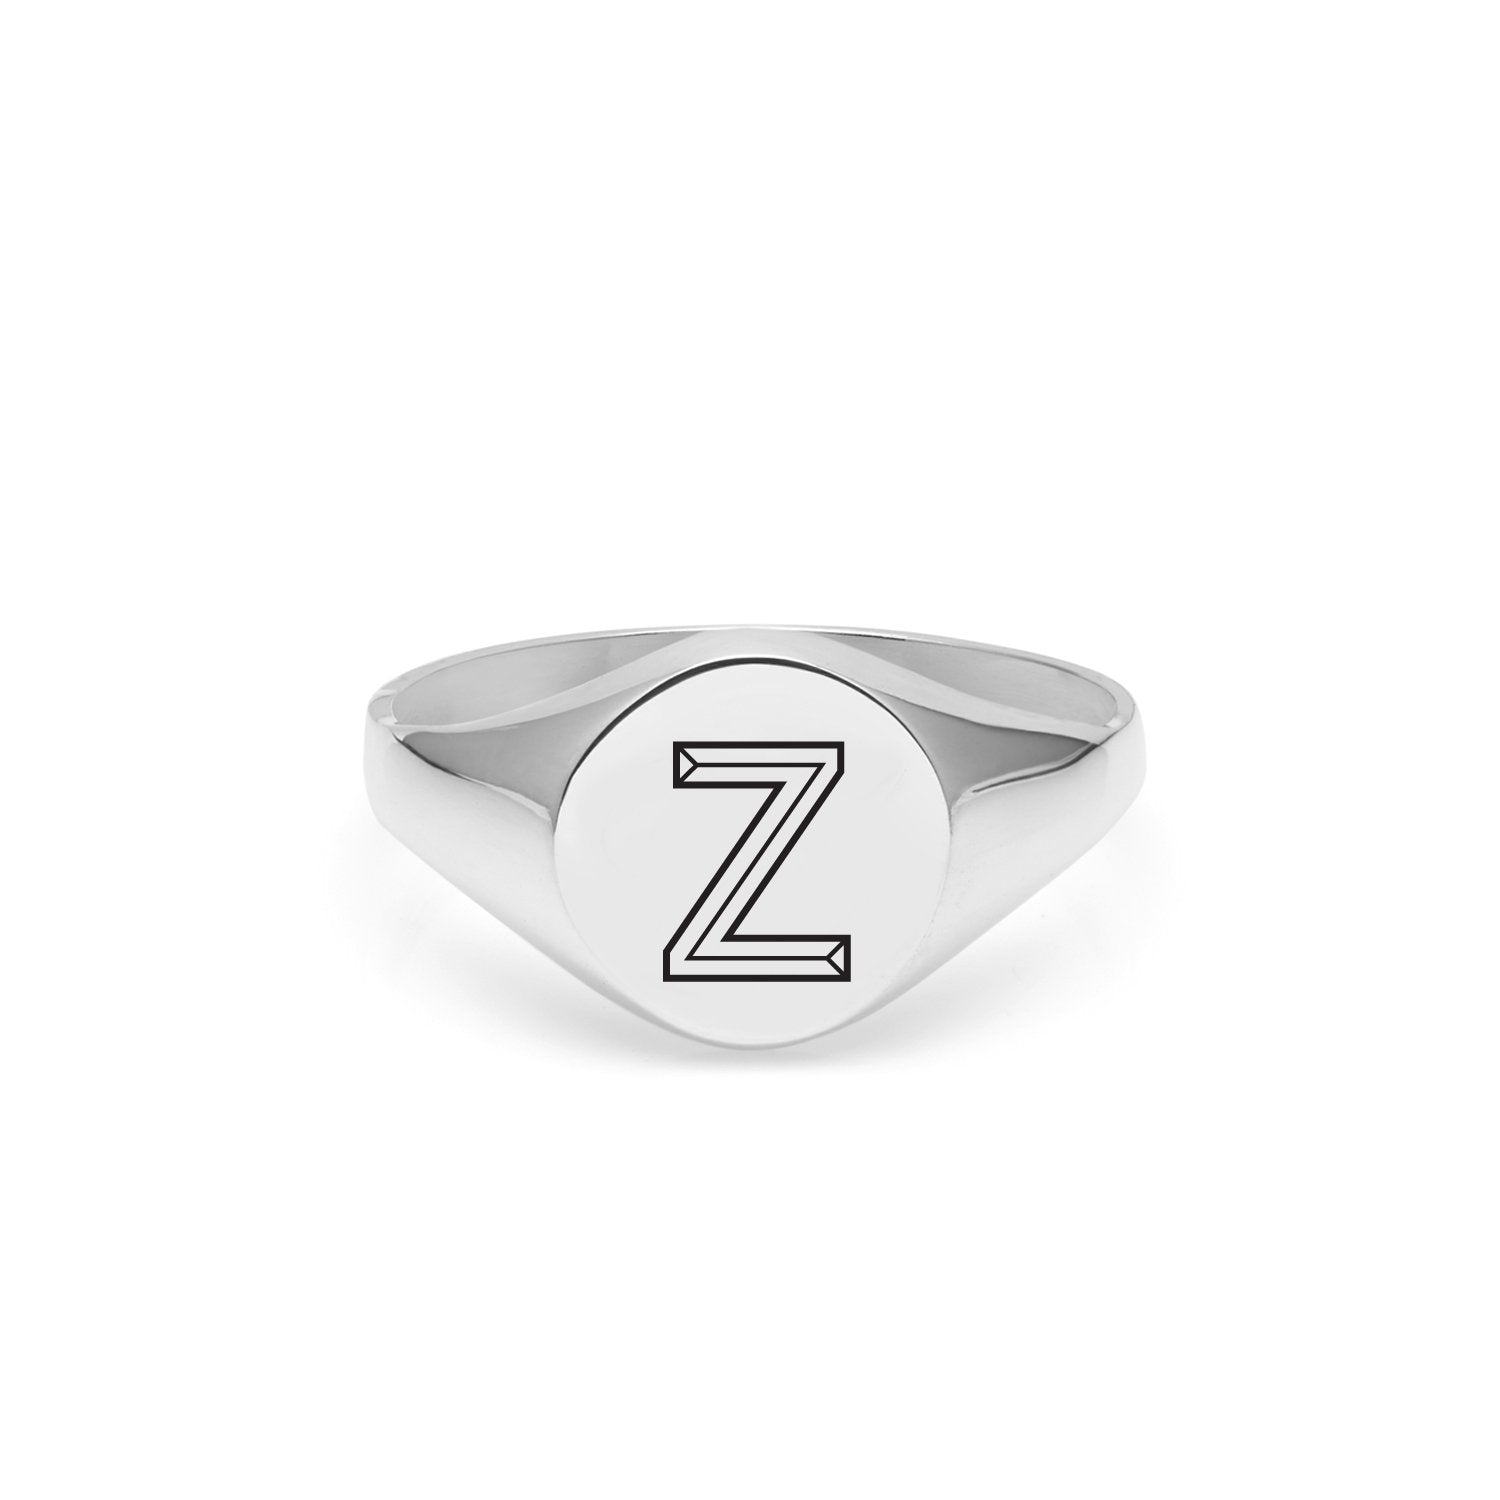 Facett Initial Z Round Signet Ring - Silver - Myia Bonner Jewellery